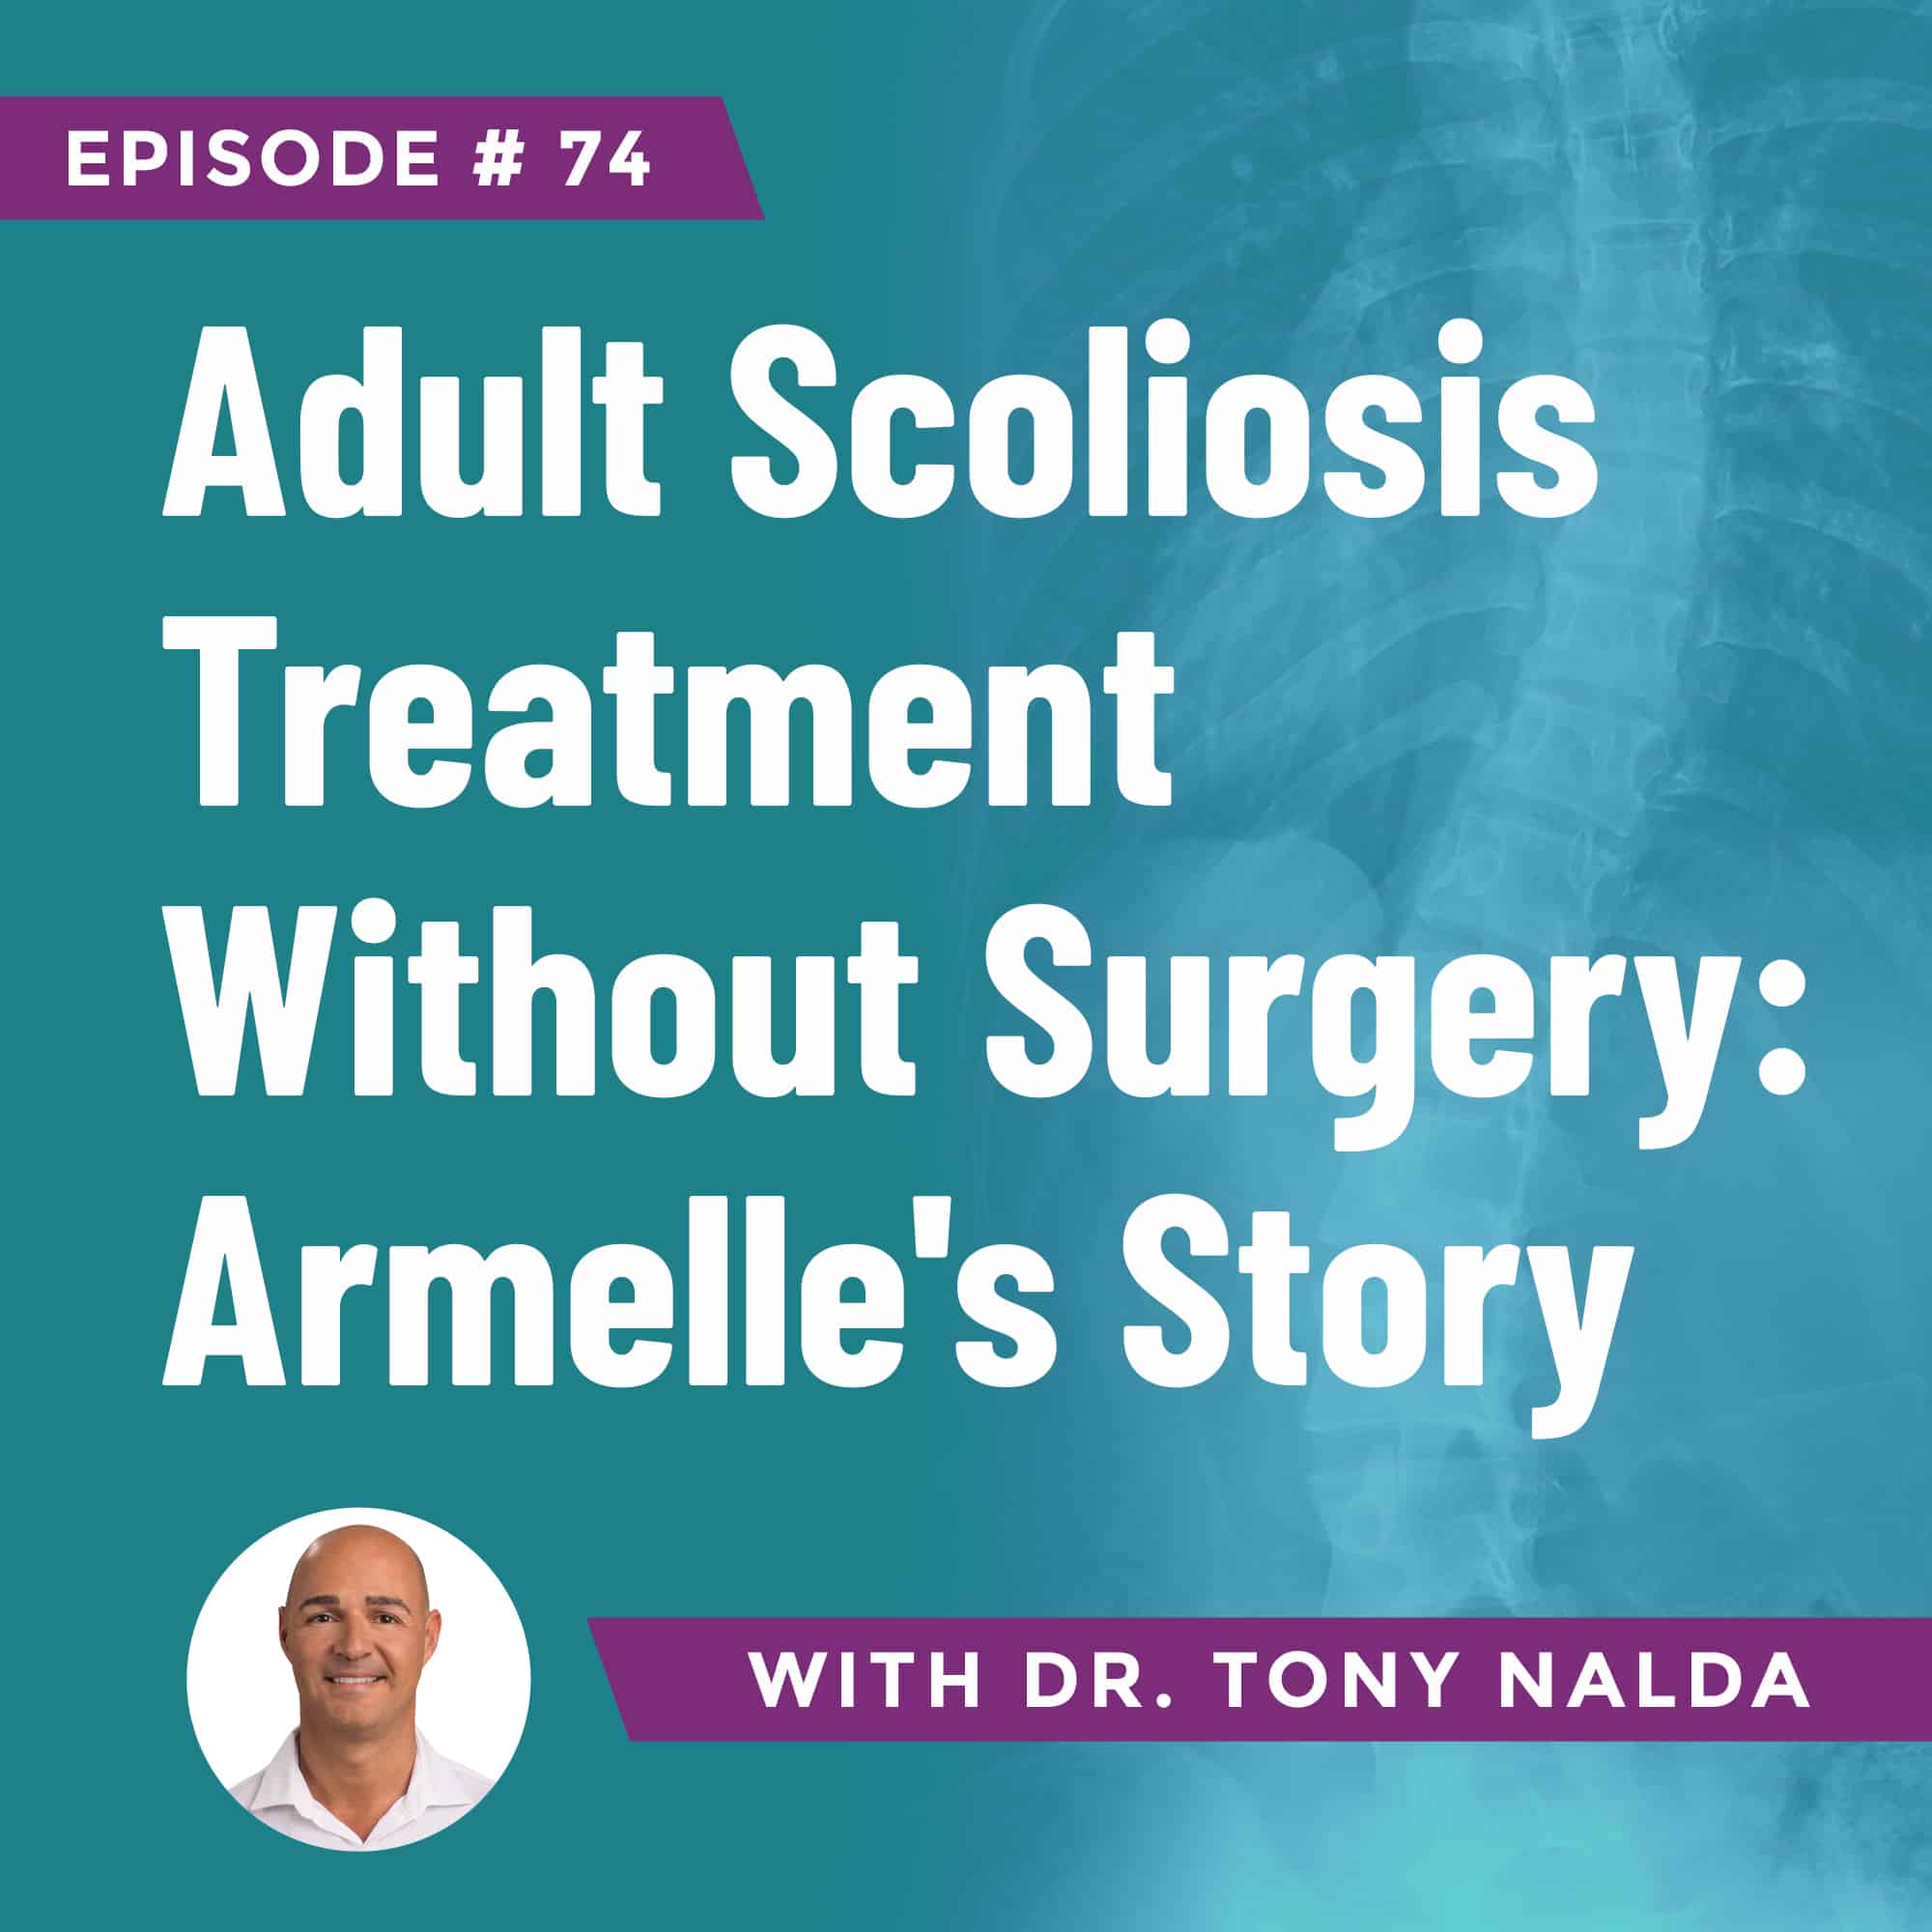 Adult Scoliosis Treatment Without Surgery: Armelle's Story